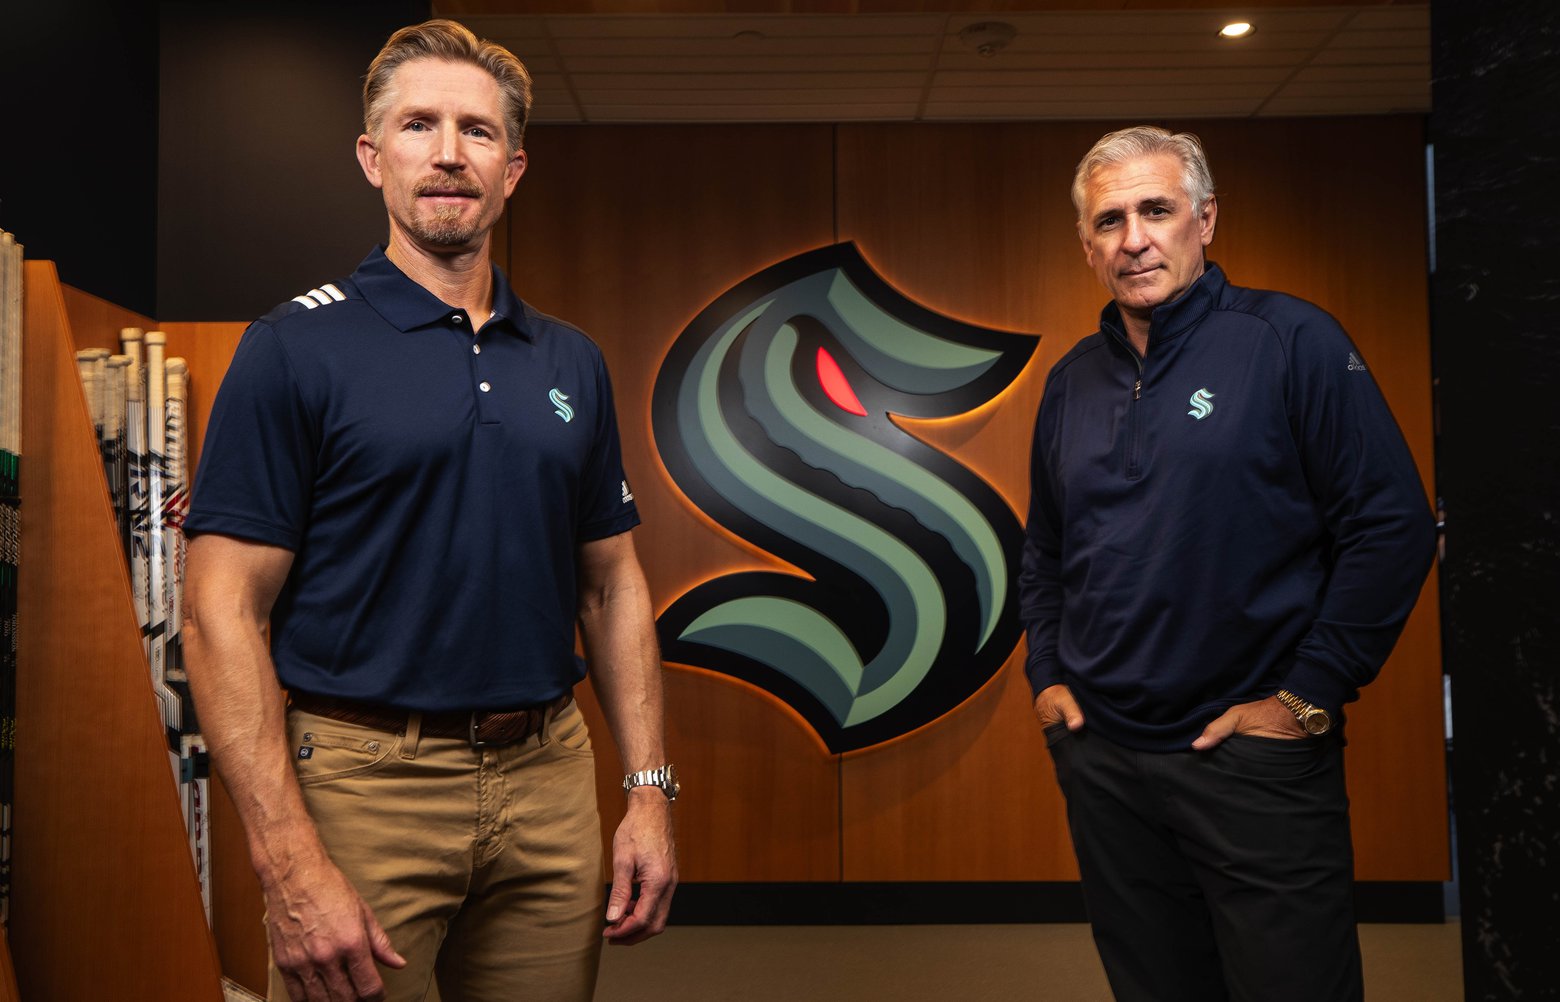 Seattle Kraken coach Dave Hakstol, left, and GM Ron Francis hope to have a hard-working, relentless team. (Dean Rutz / The Seattle Times)